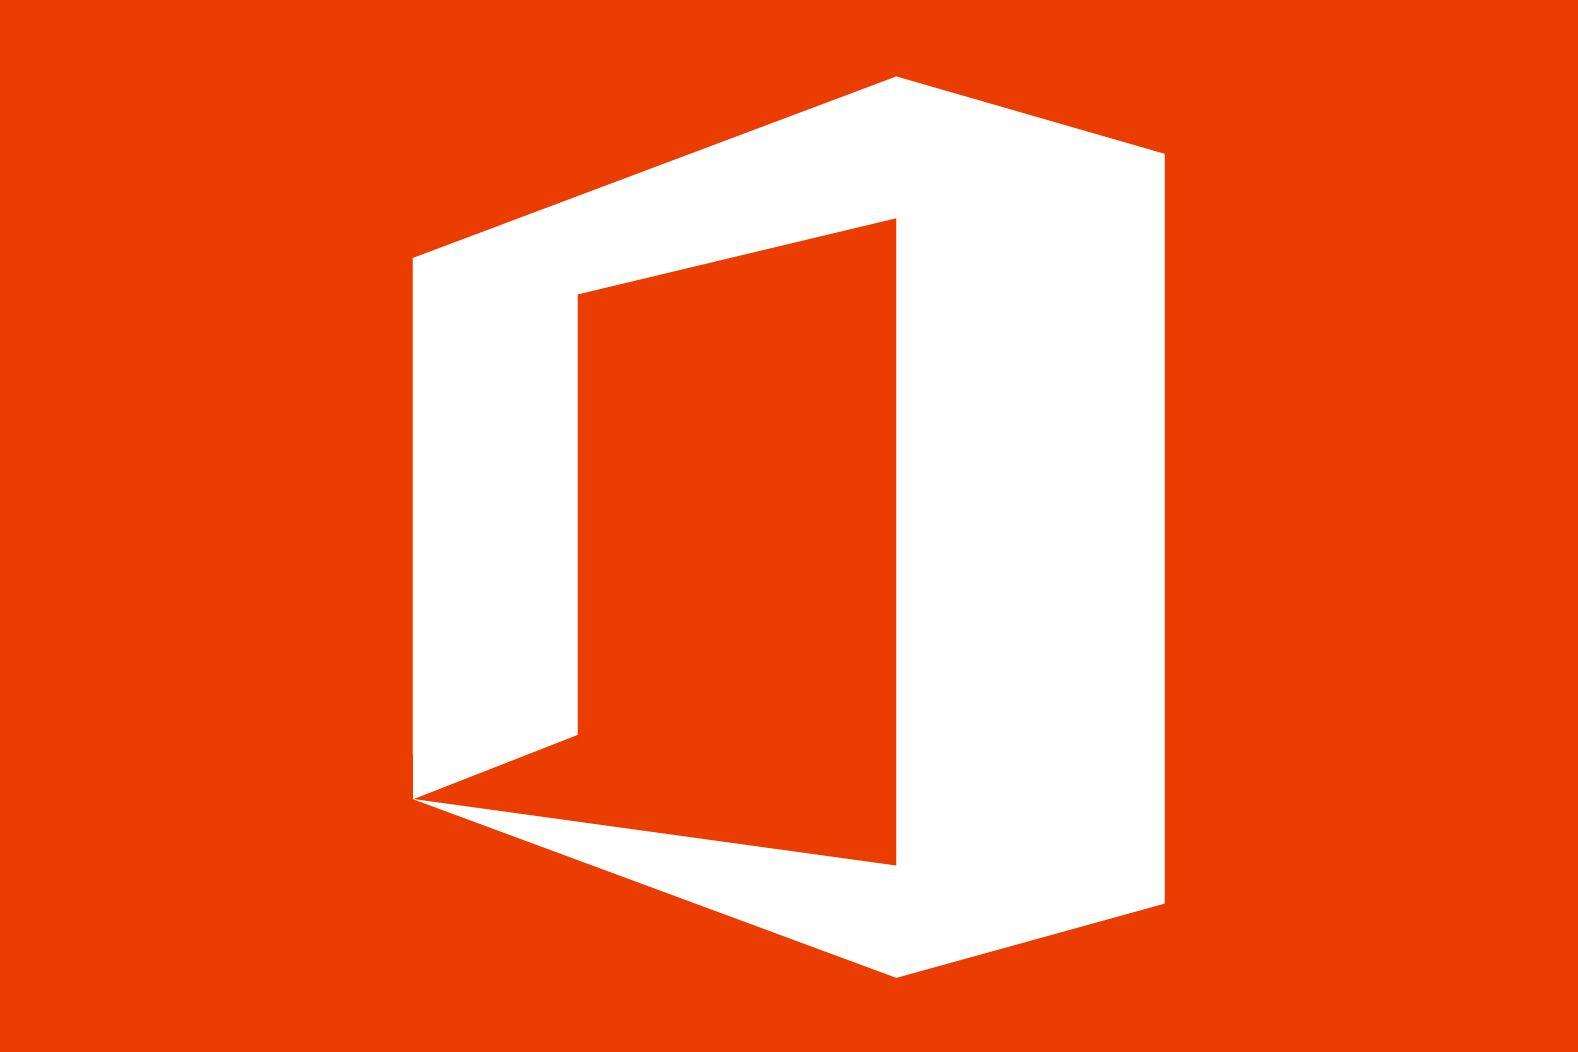 Microsoft Office Logo - Office 2019 will have one big system requirement: Windows 10 | PCWorld